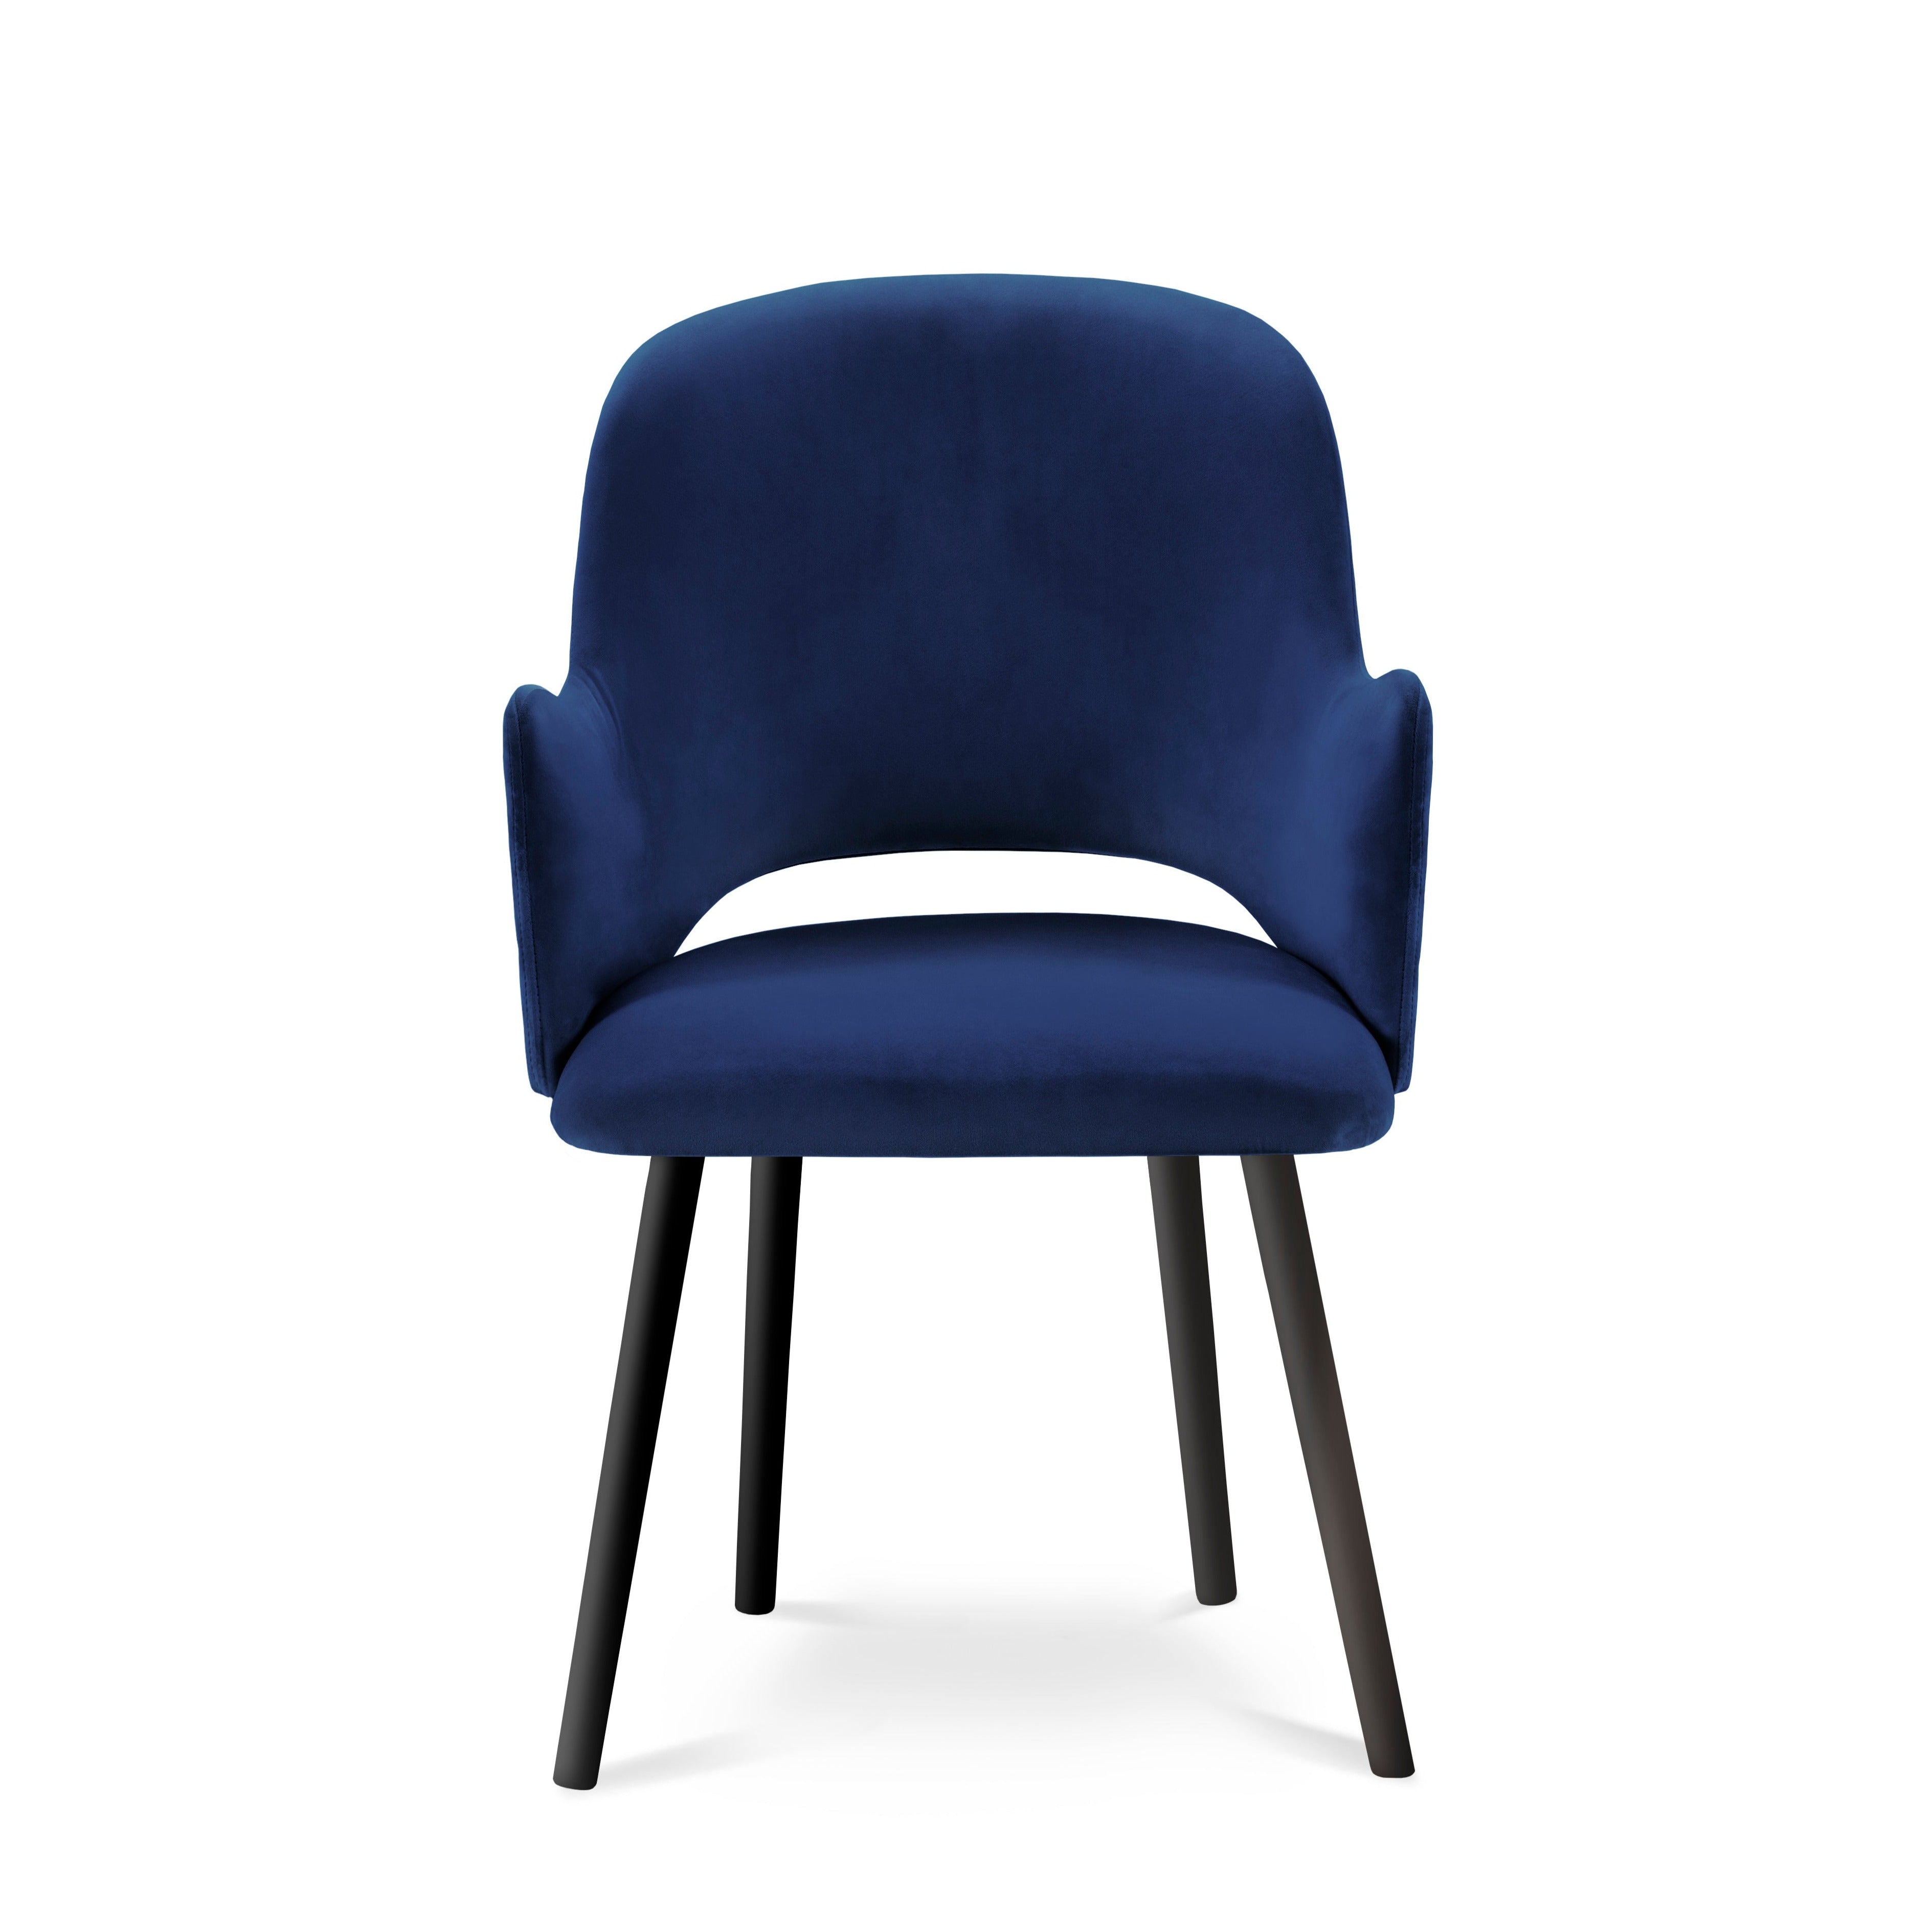 Navy chair for a modern dining room